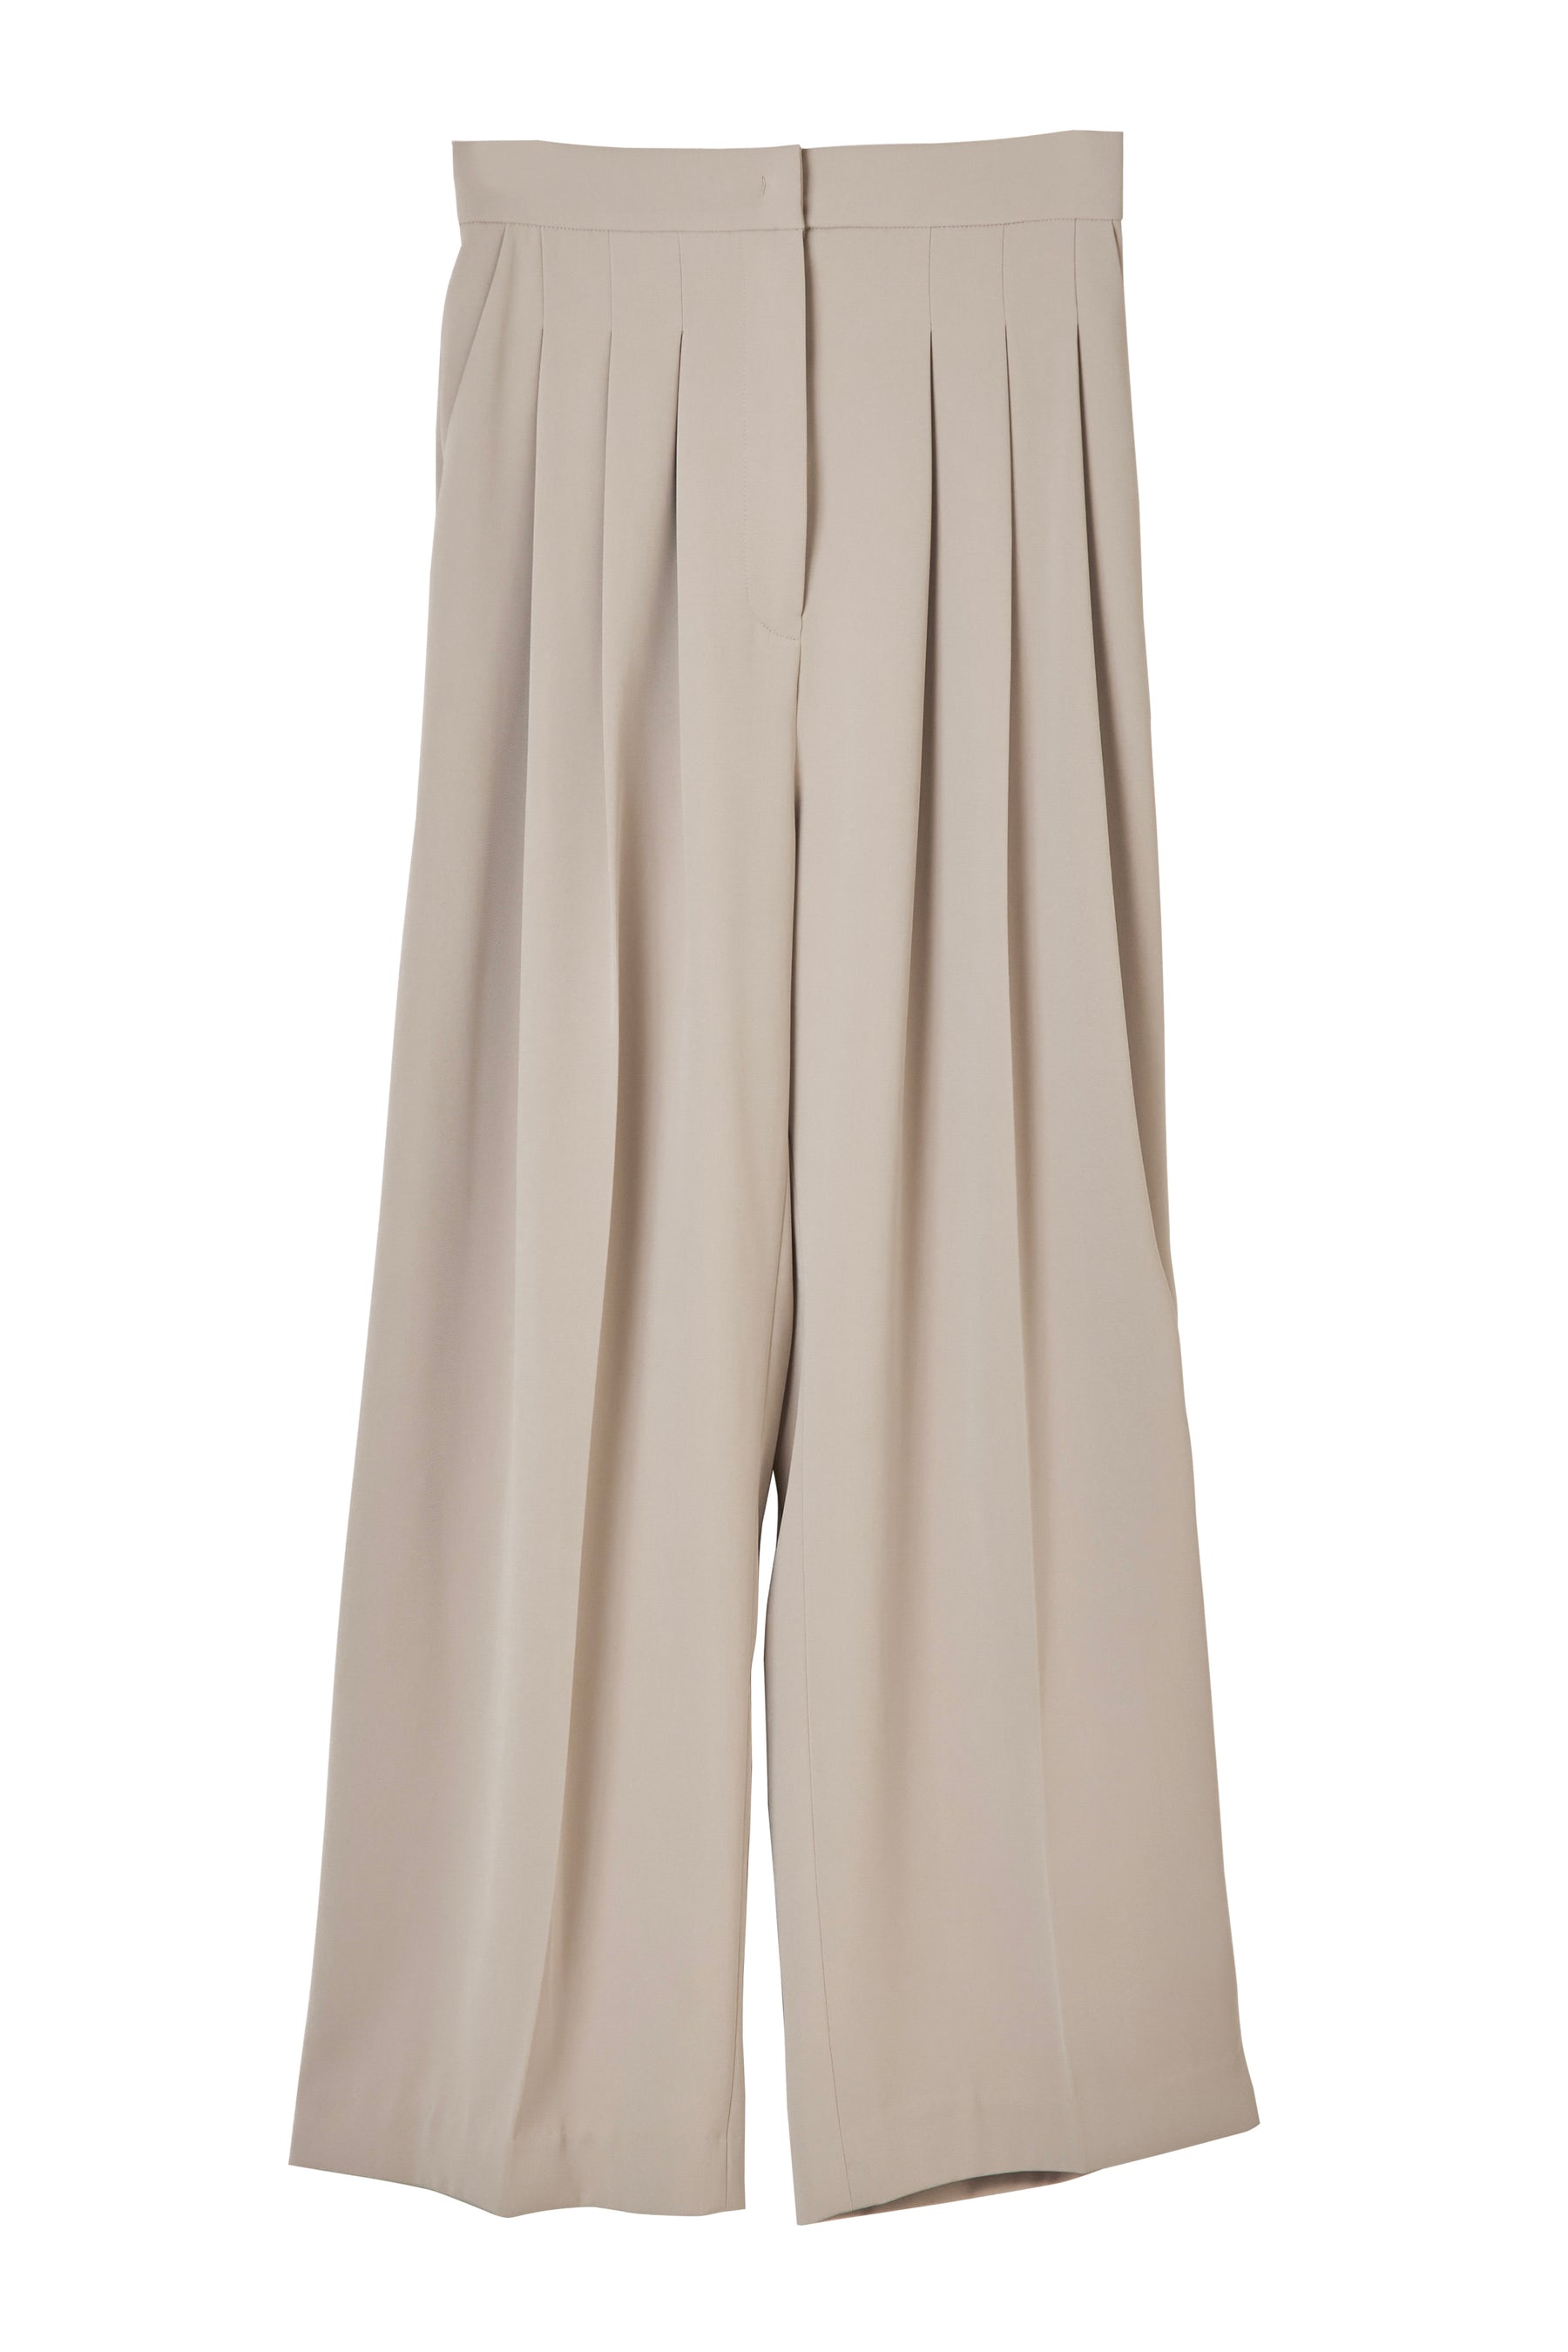 Shipped in mid-March] SoHo Wide-Leg Pants